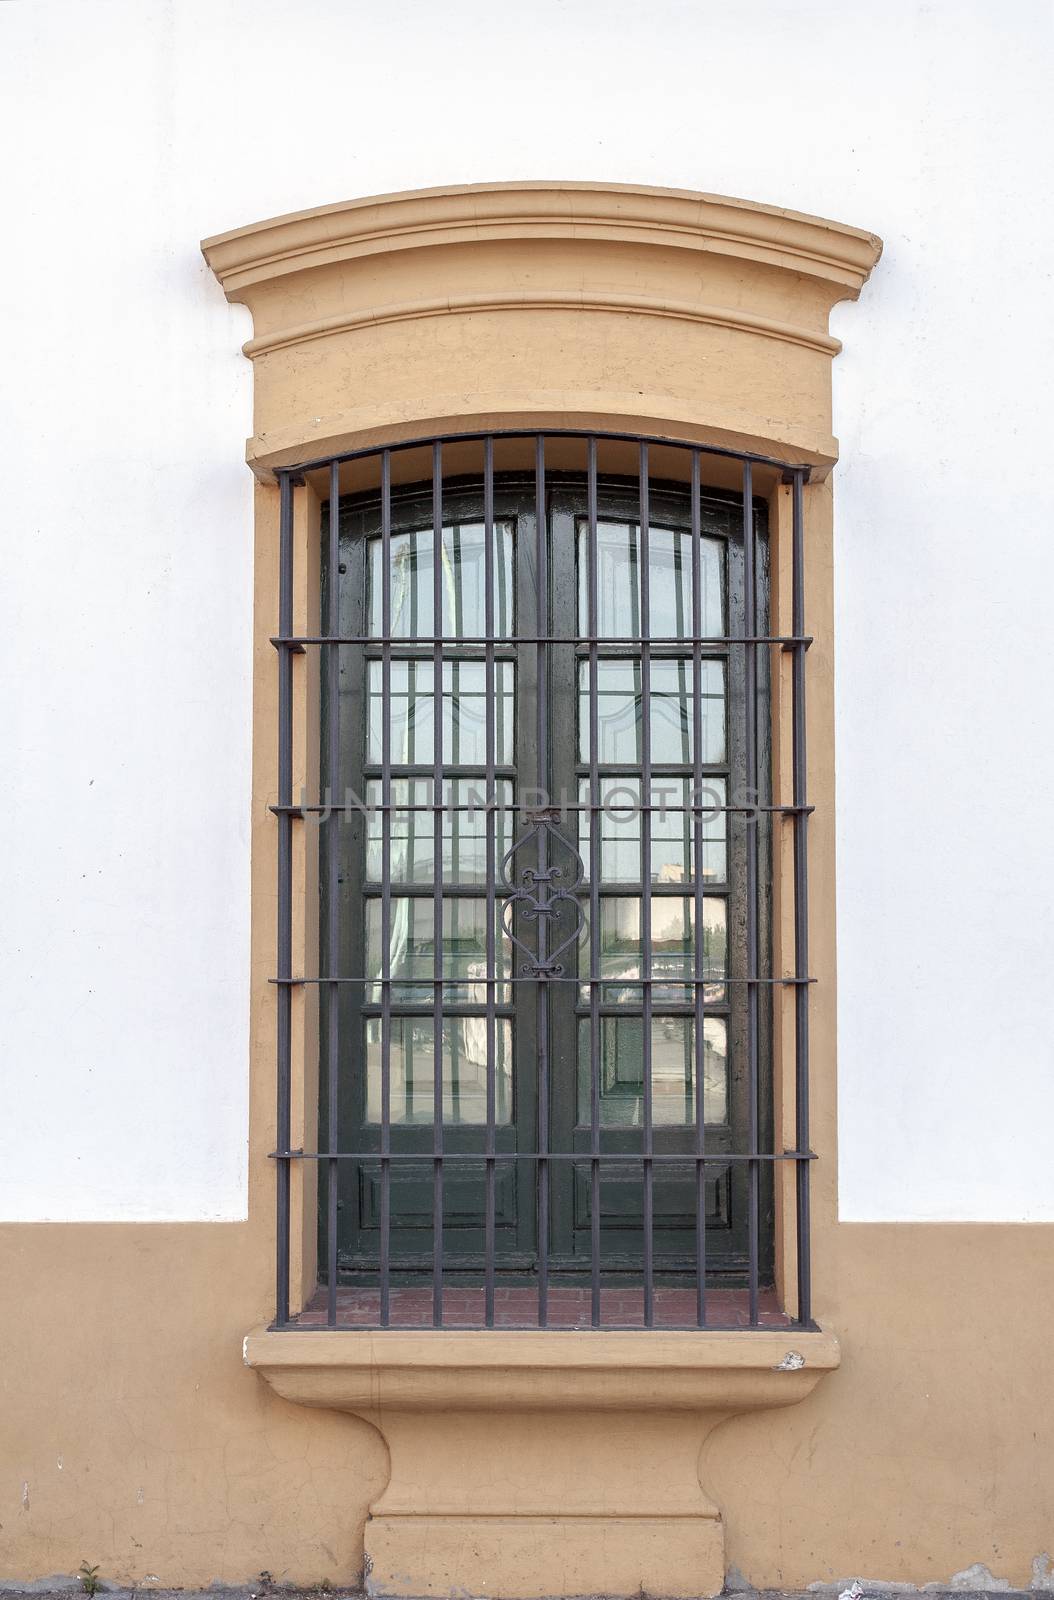 Stock image of a Spanish colonial window.